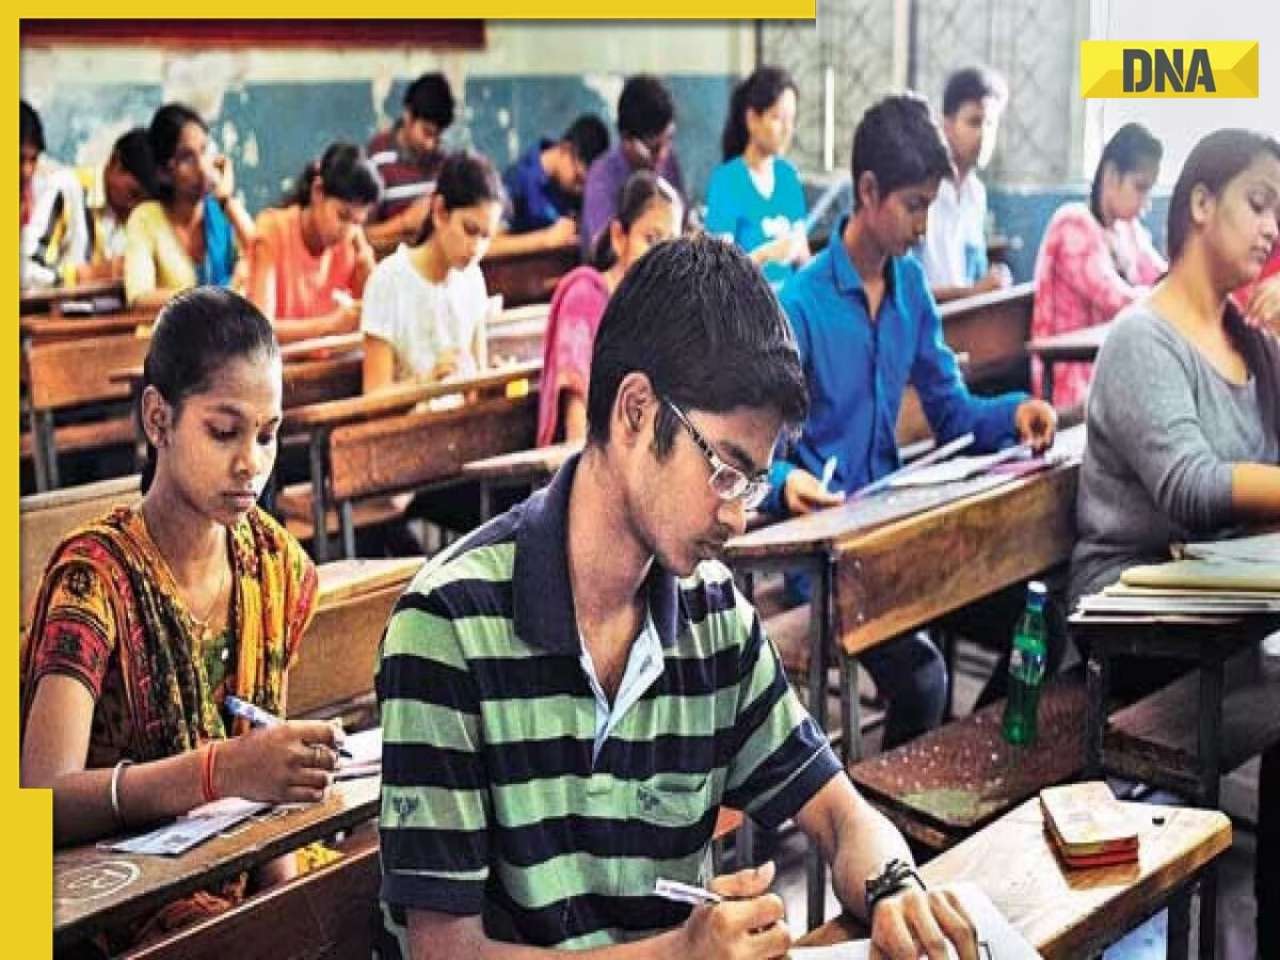 Last-minute guide: JEE Main exam begins today, tips to manage stress